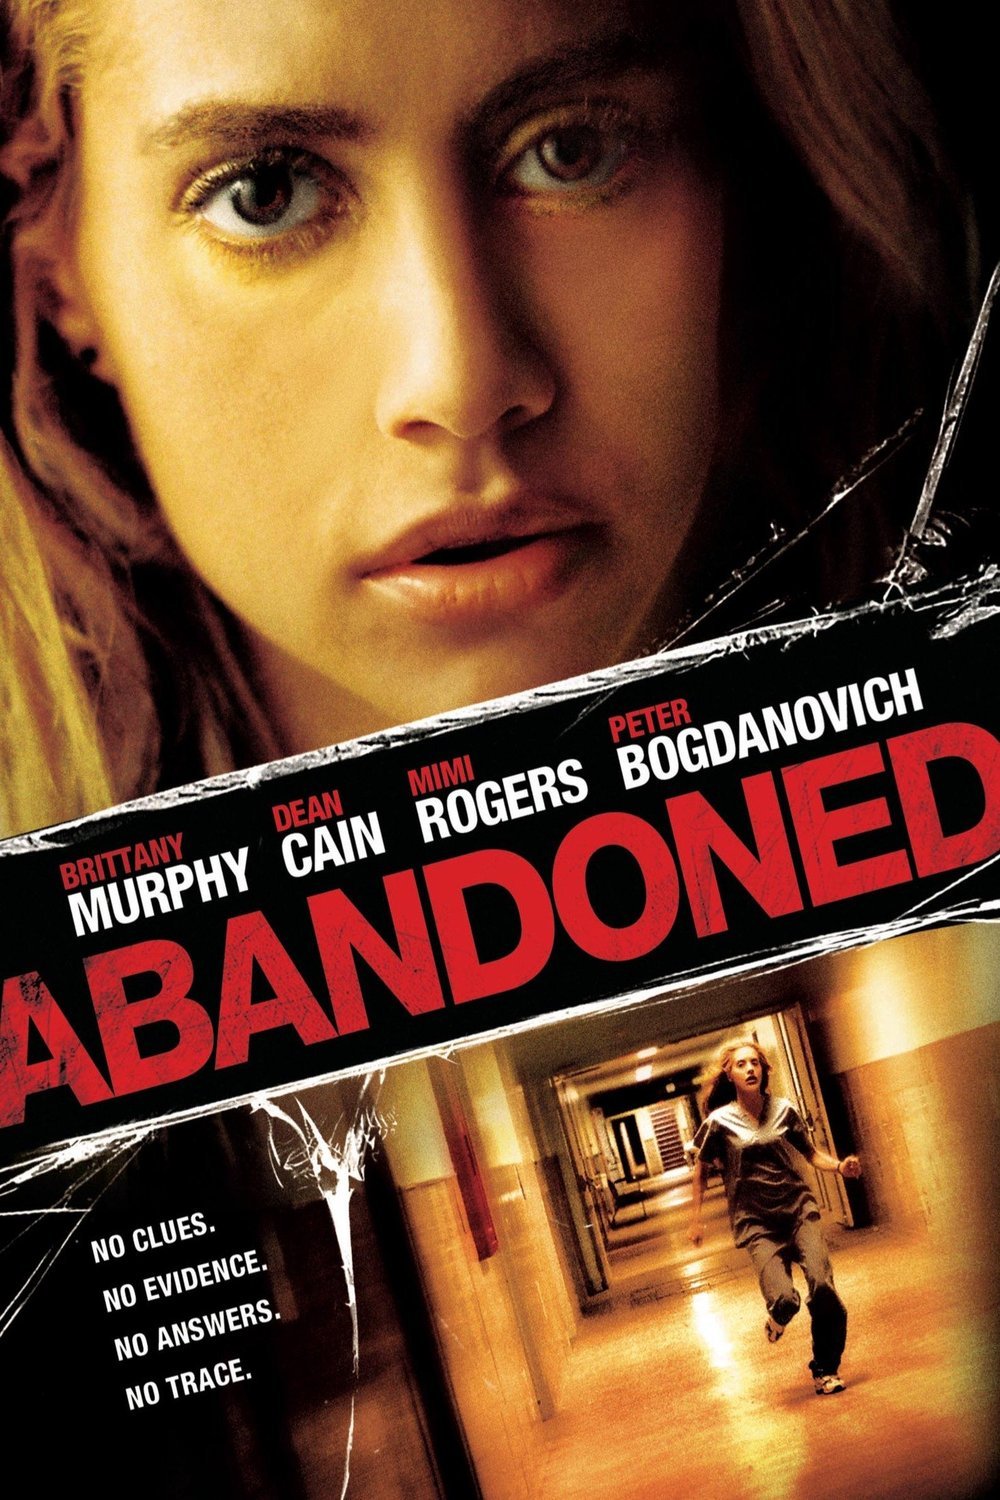 Poster of the movie Abandoned